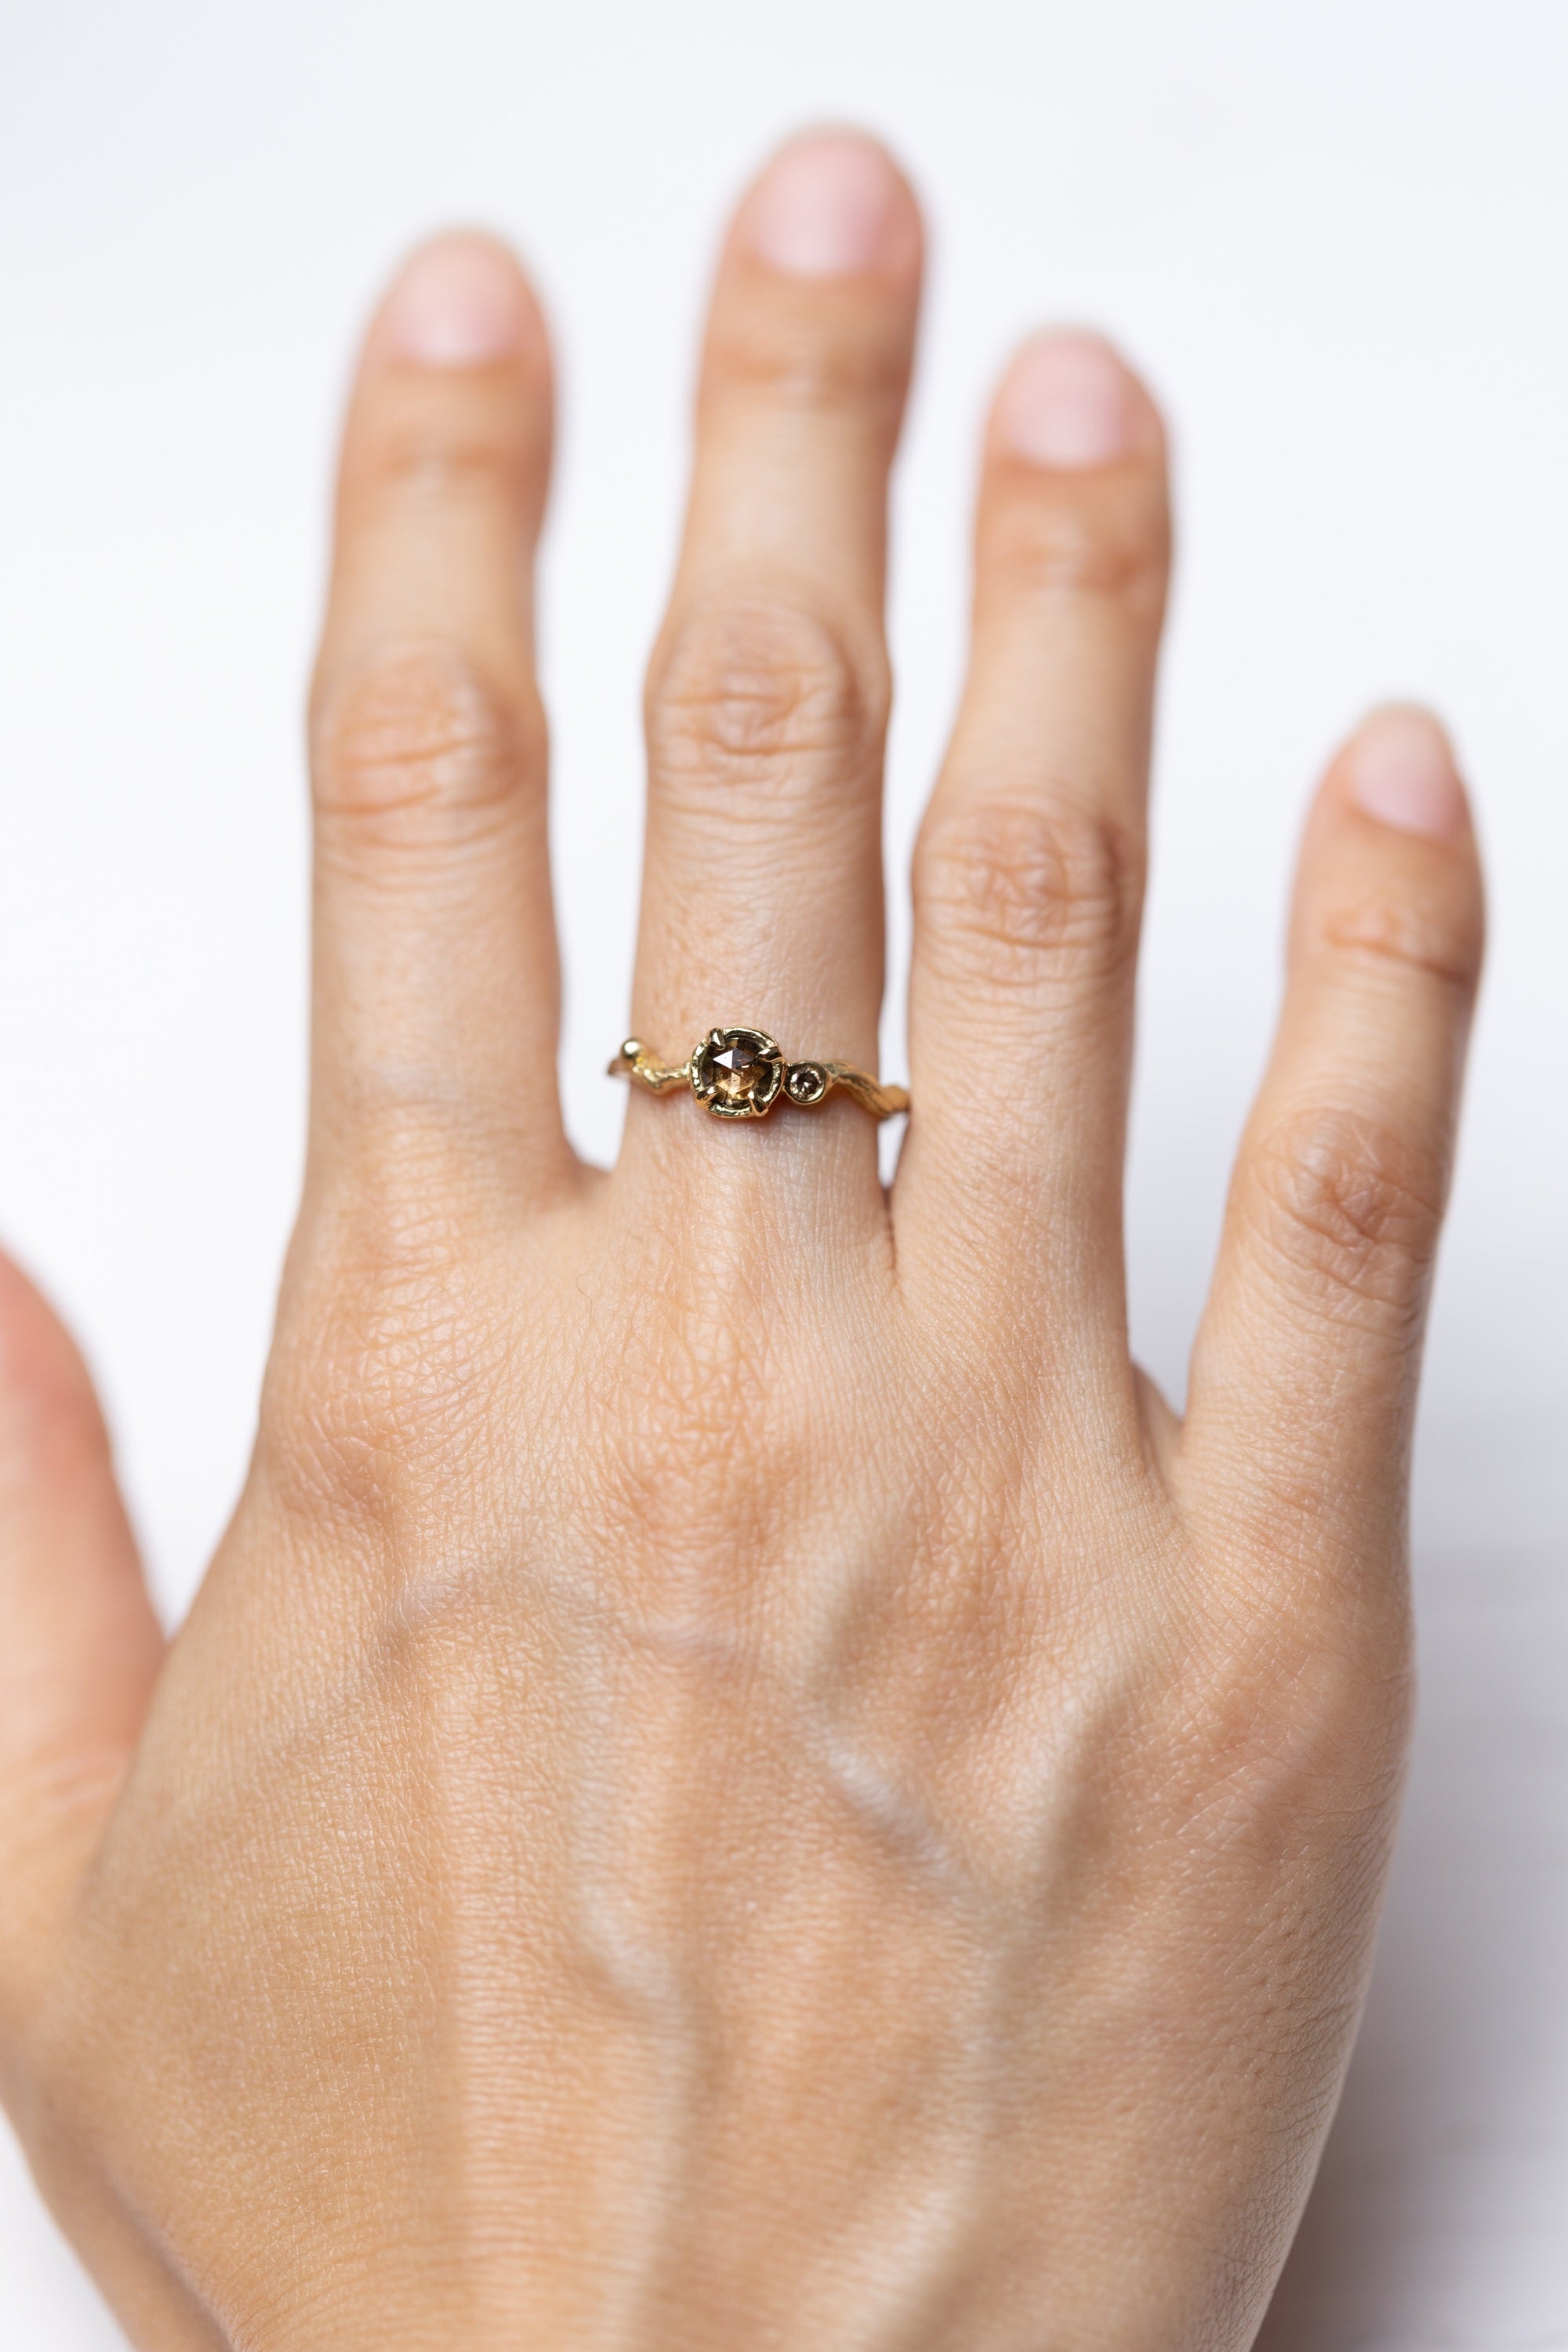 Brown Diamond and a Small Champagne Diamond Twig Ring (18k)